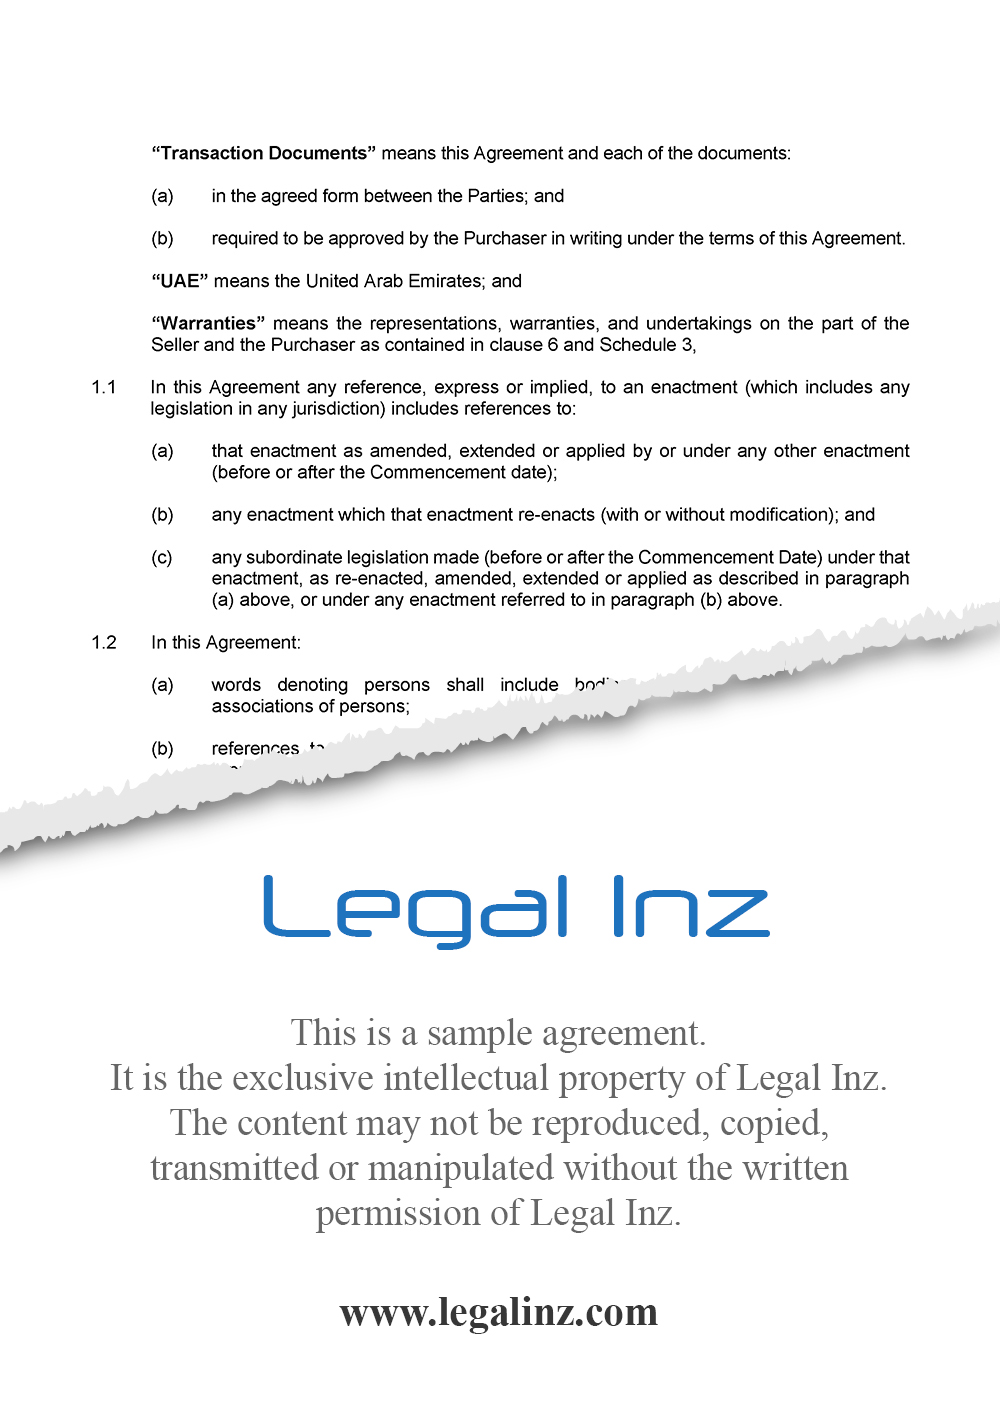 Share Purchase Agreement Sample 3